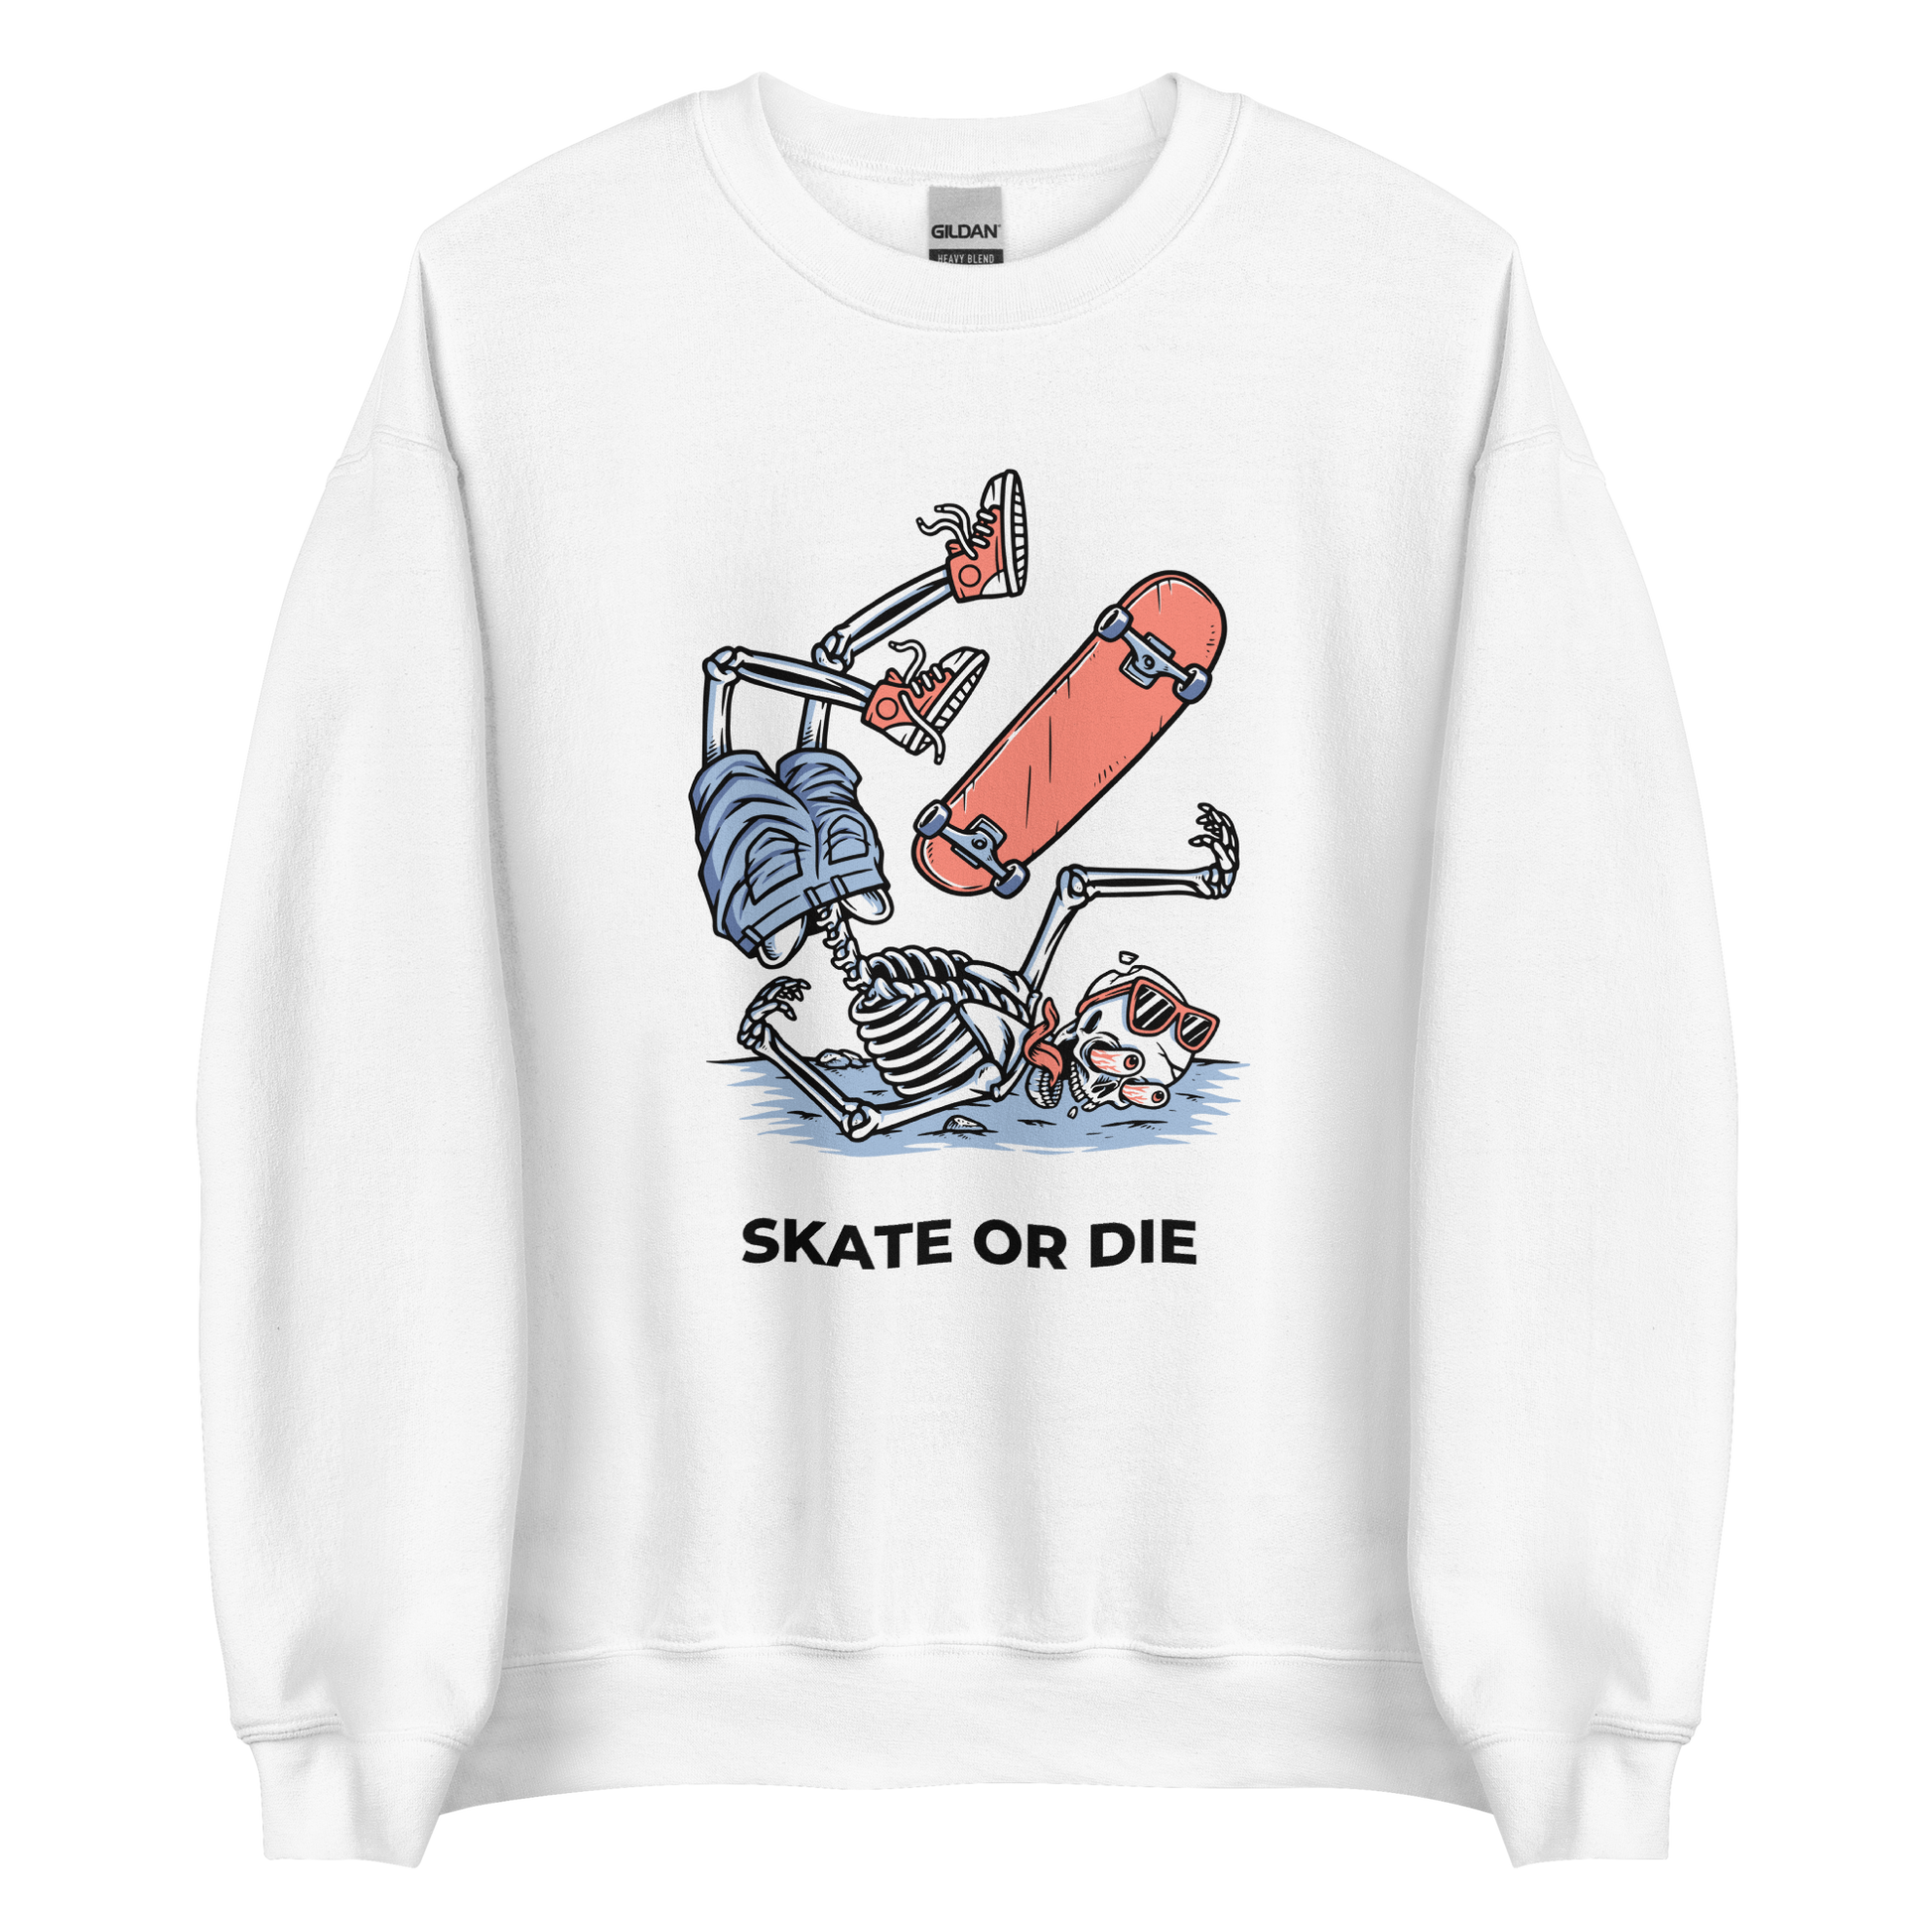 White Skate or Die Sweatshirt featuring a daring Skeleton Falling While Skateboarding graphic on the chest - Cool Graphic Skeleton Sweatshirts - Boozy Fox